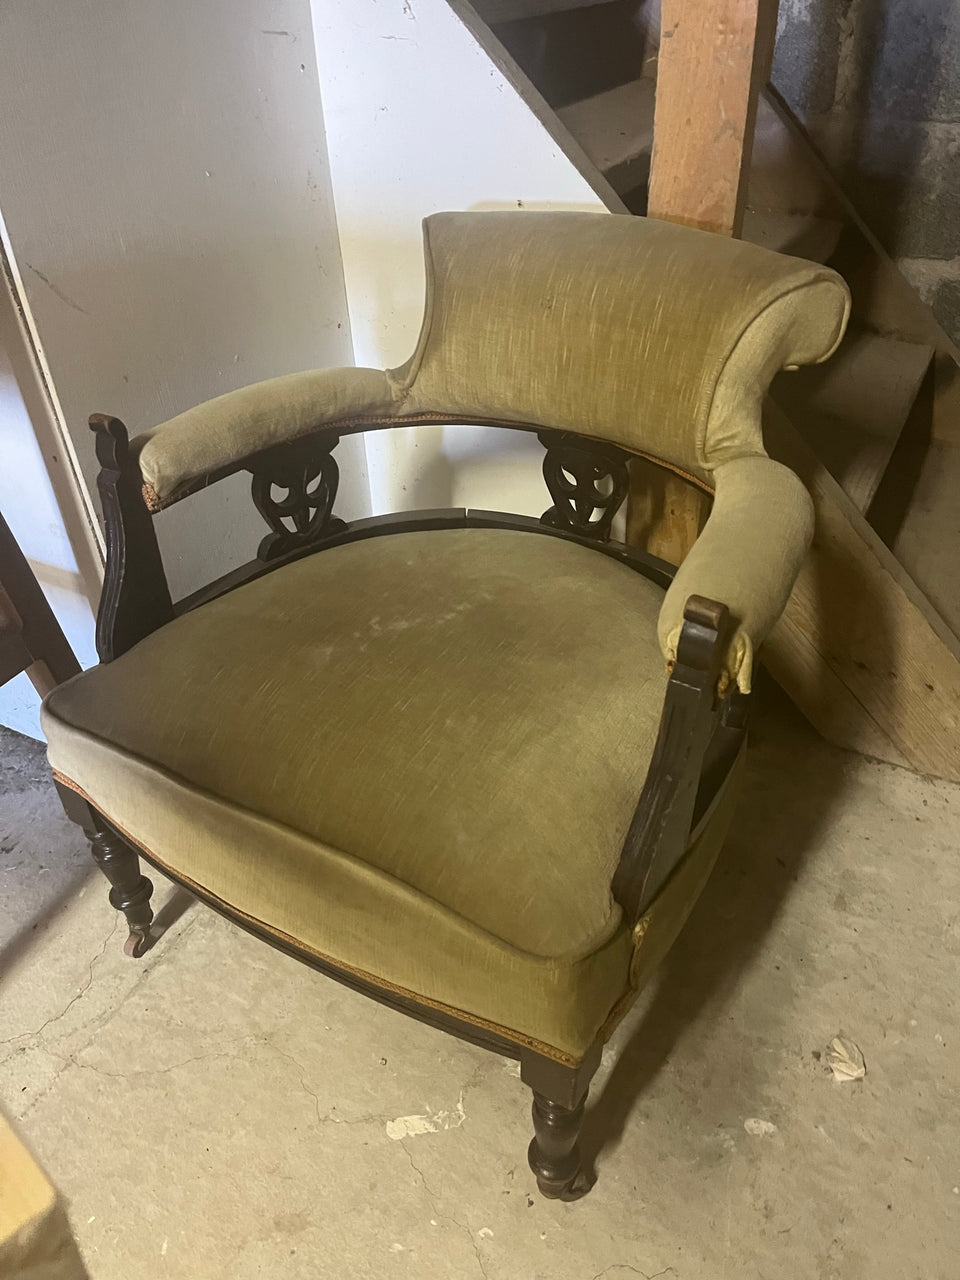 Antique Library Chair